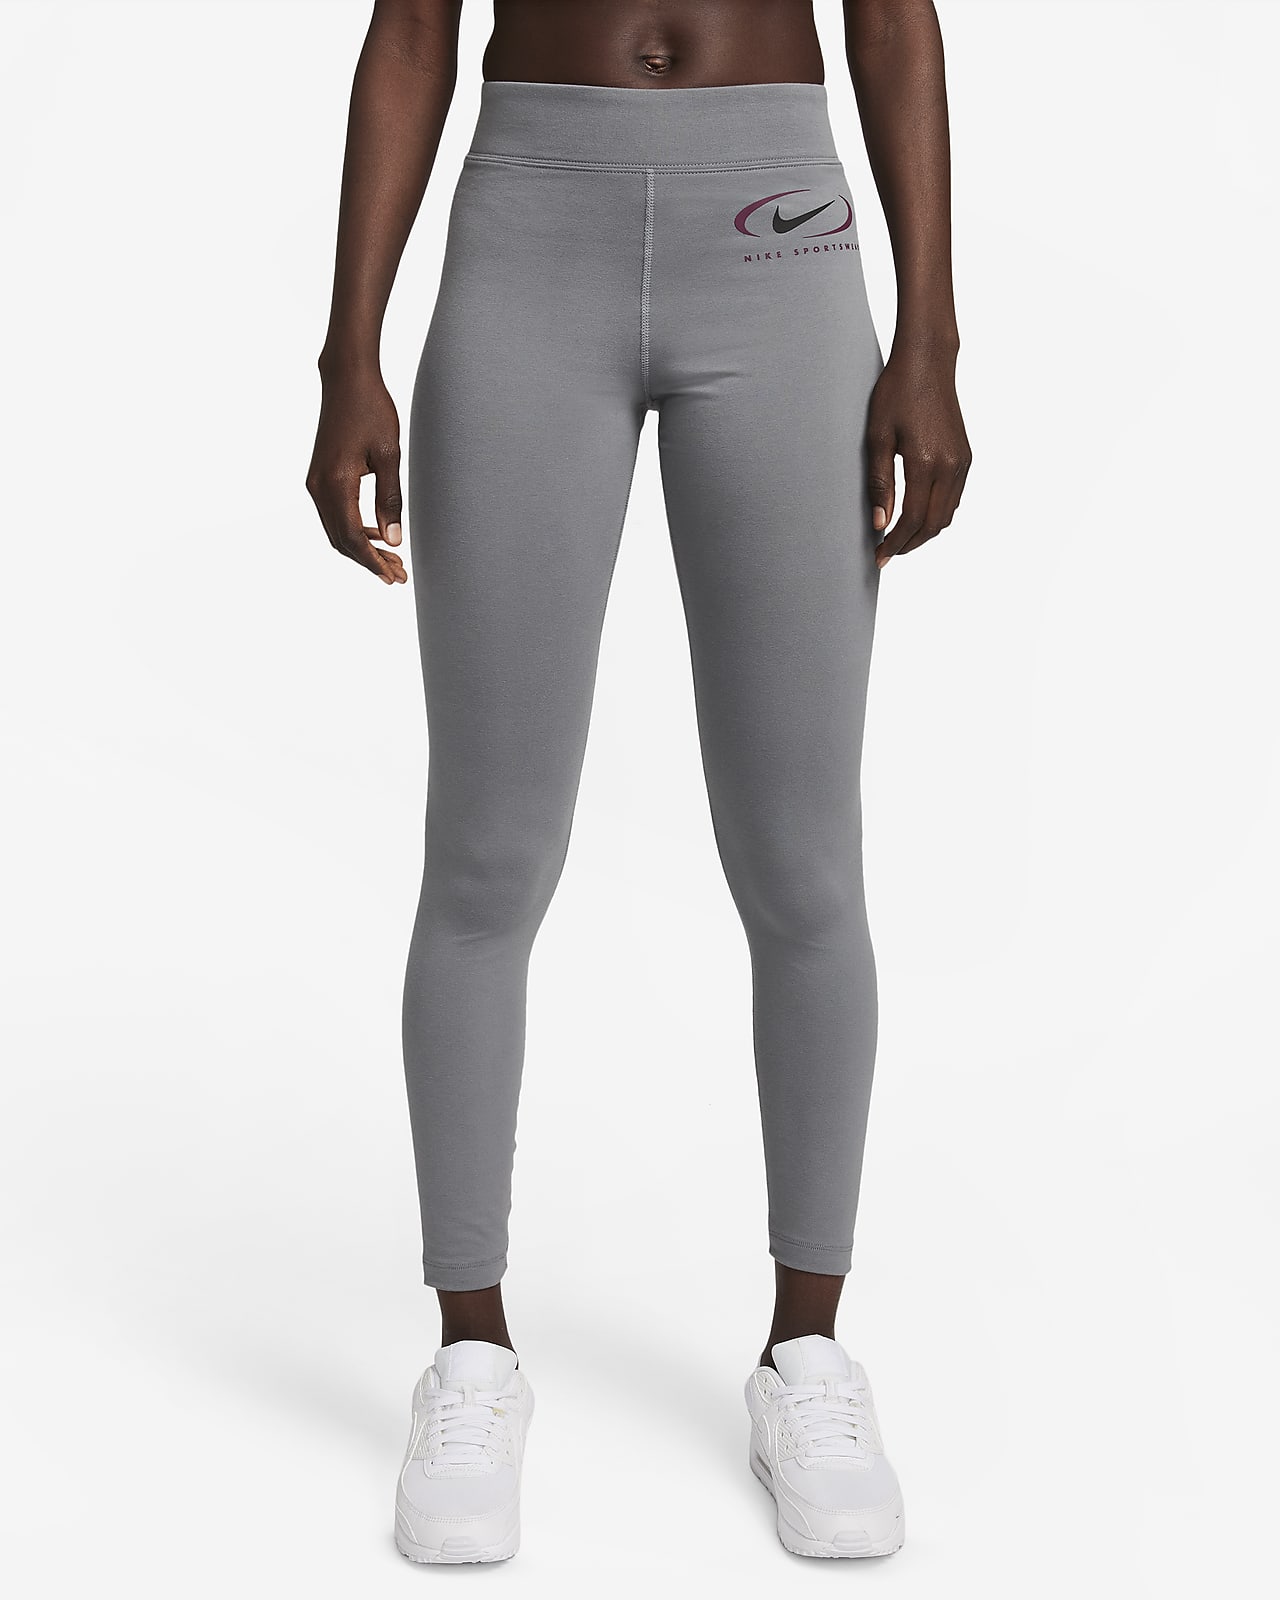 Nike Women's Epic Lux High-Waisted 7/8 Printed Running Tights, Blue, XL -  Walmart.com